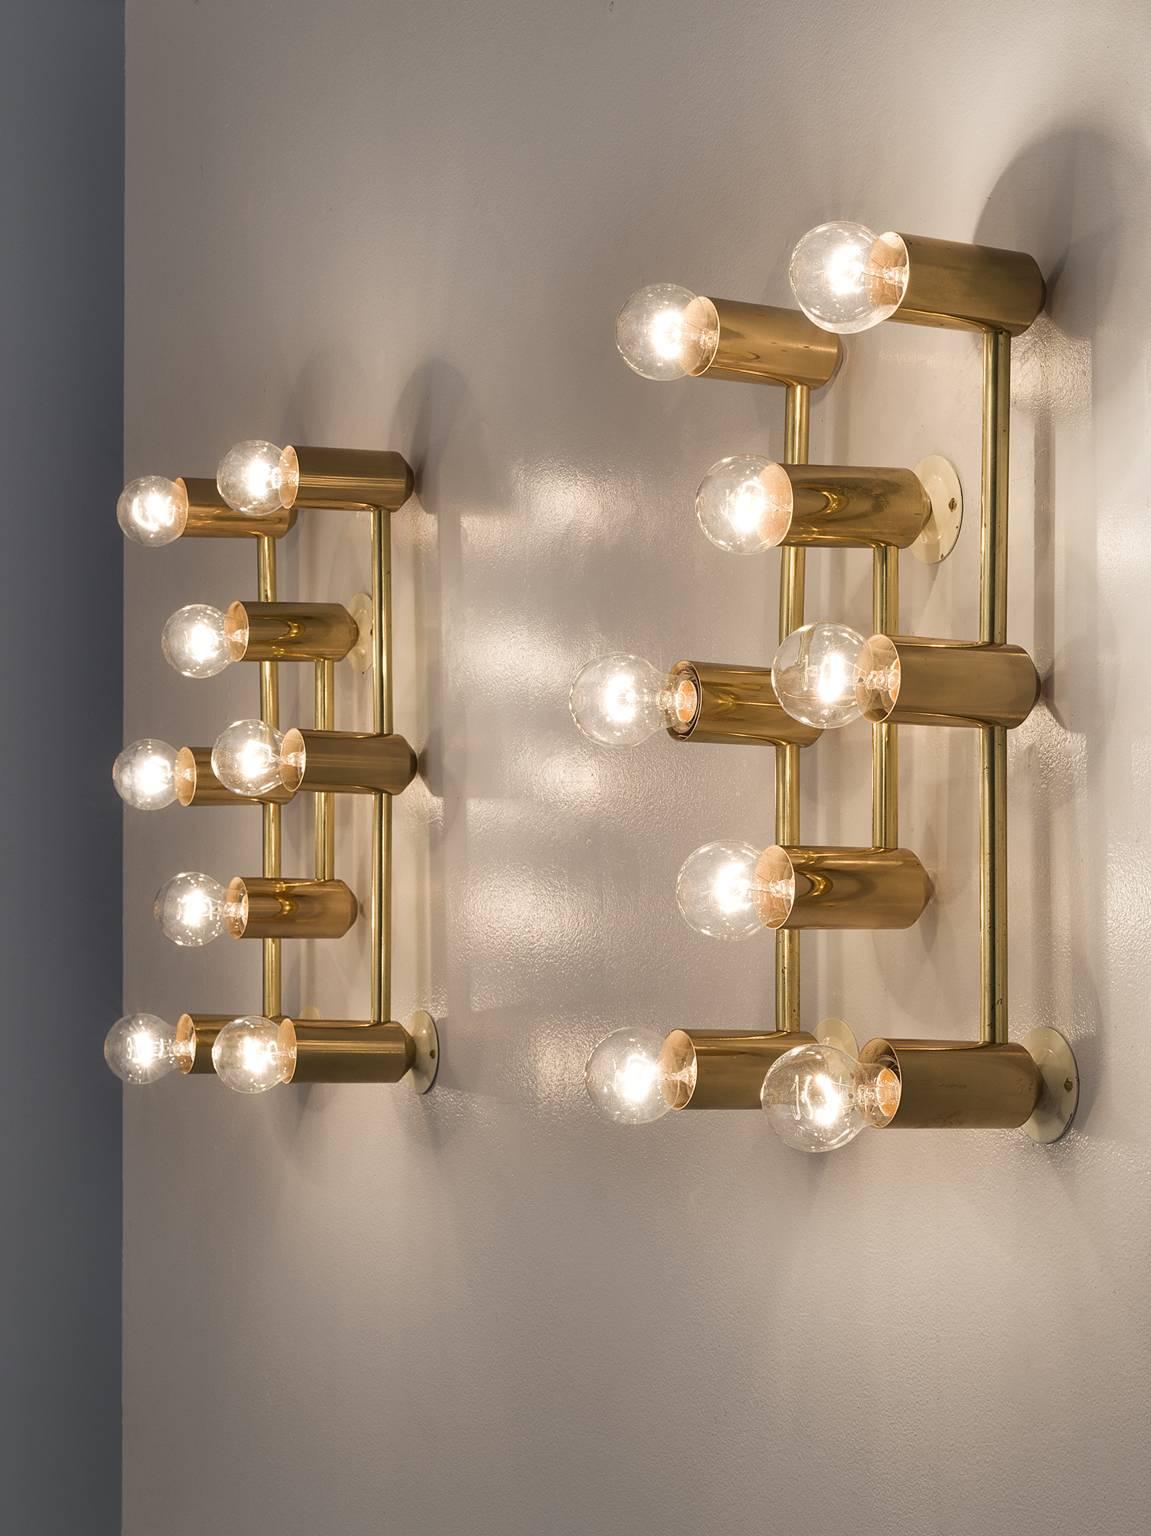 Wall lights, brass, 1960s, Europe.

This set of delicate wall lights are Minimalist yet warm. Each light consists of eight light bulbs that are placed in three rows of which the middle section holds only two and the outer three. The light source